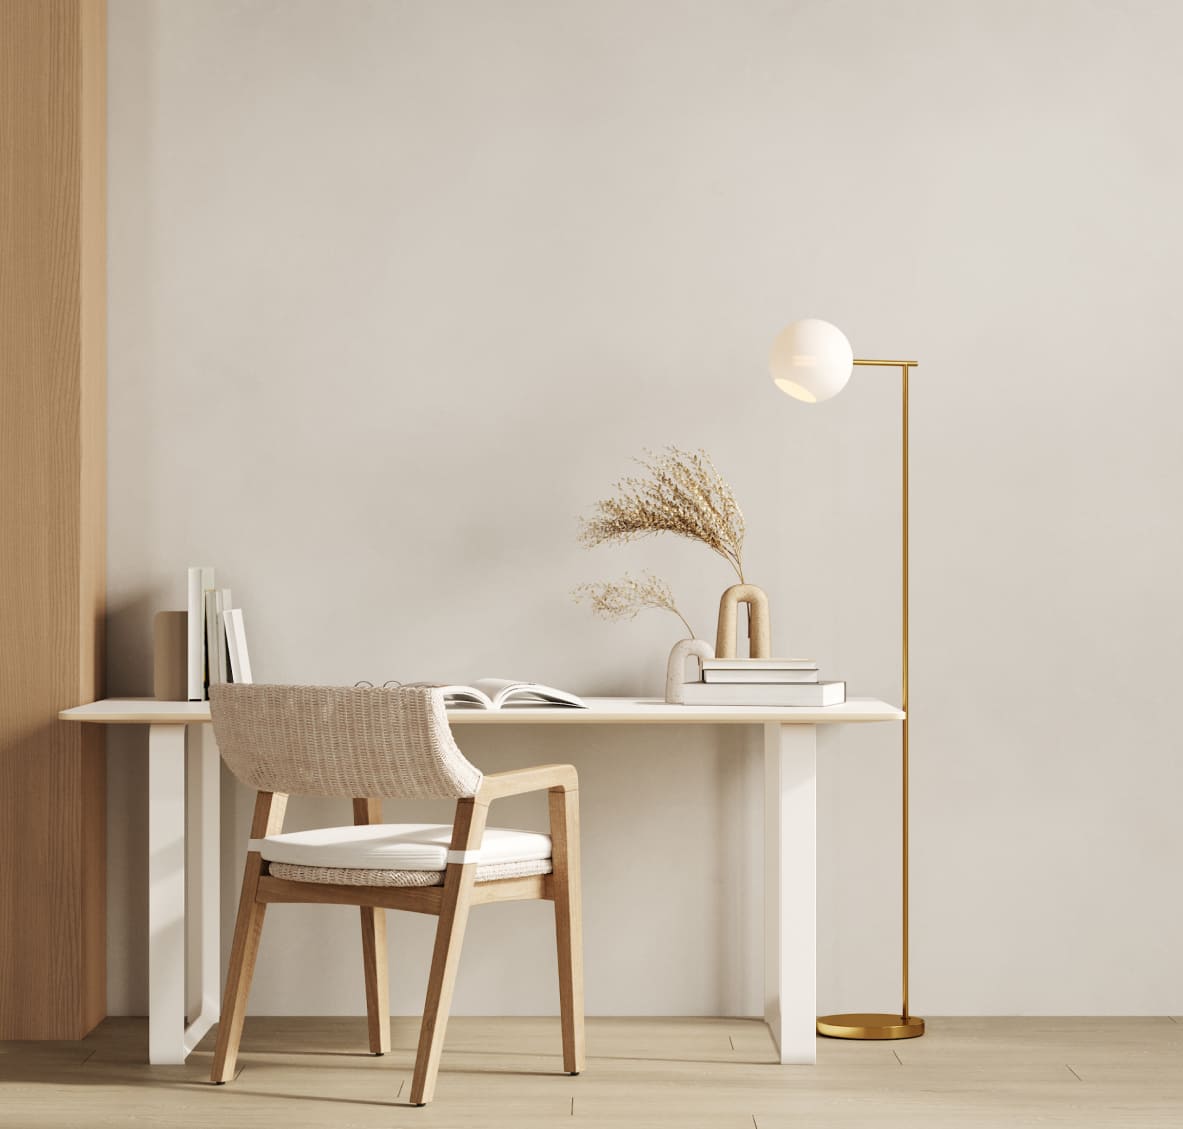 Interior working desk with wooden chair and lamp